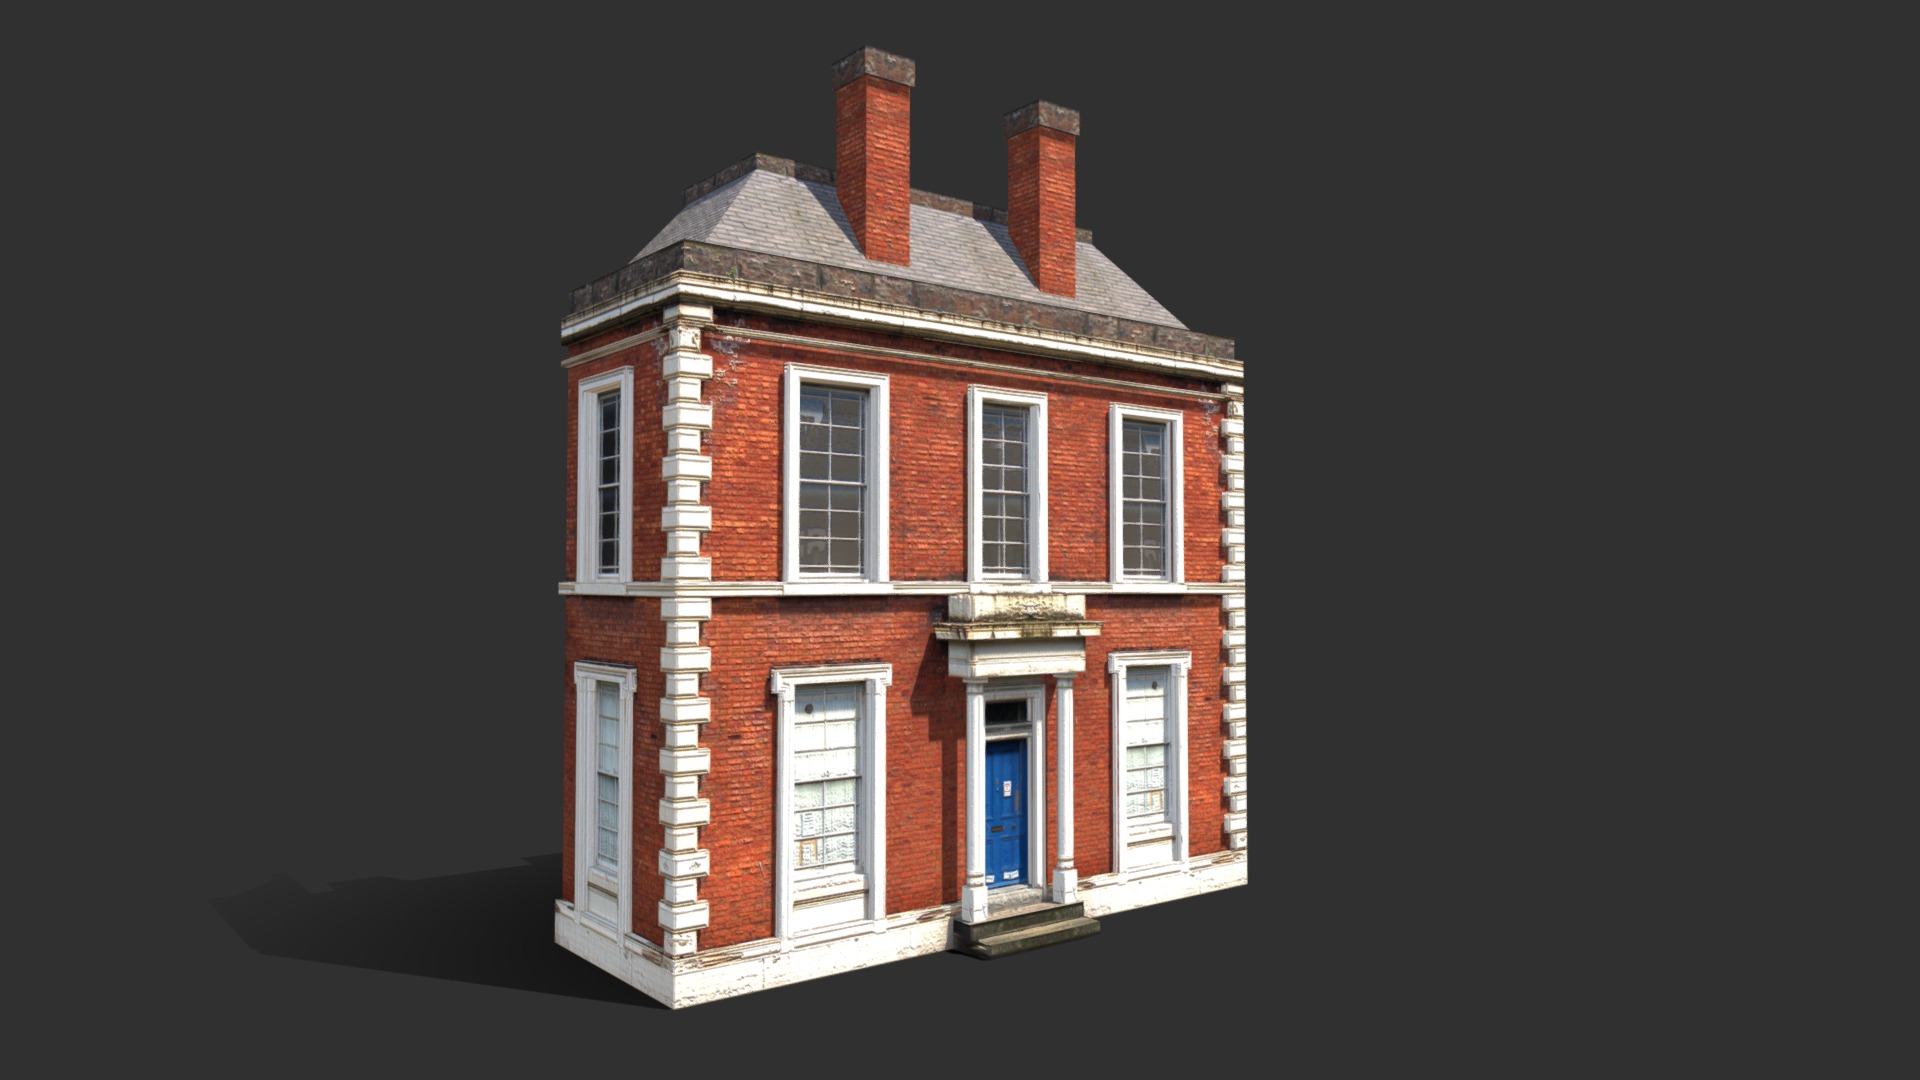 3D model Apartment house #42 Low Poly 3d Model - This is a 3D model of the Apartment house #42 Low Poly 3d Model. The 3D model is about a small brick house.